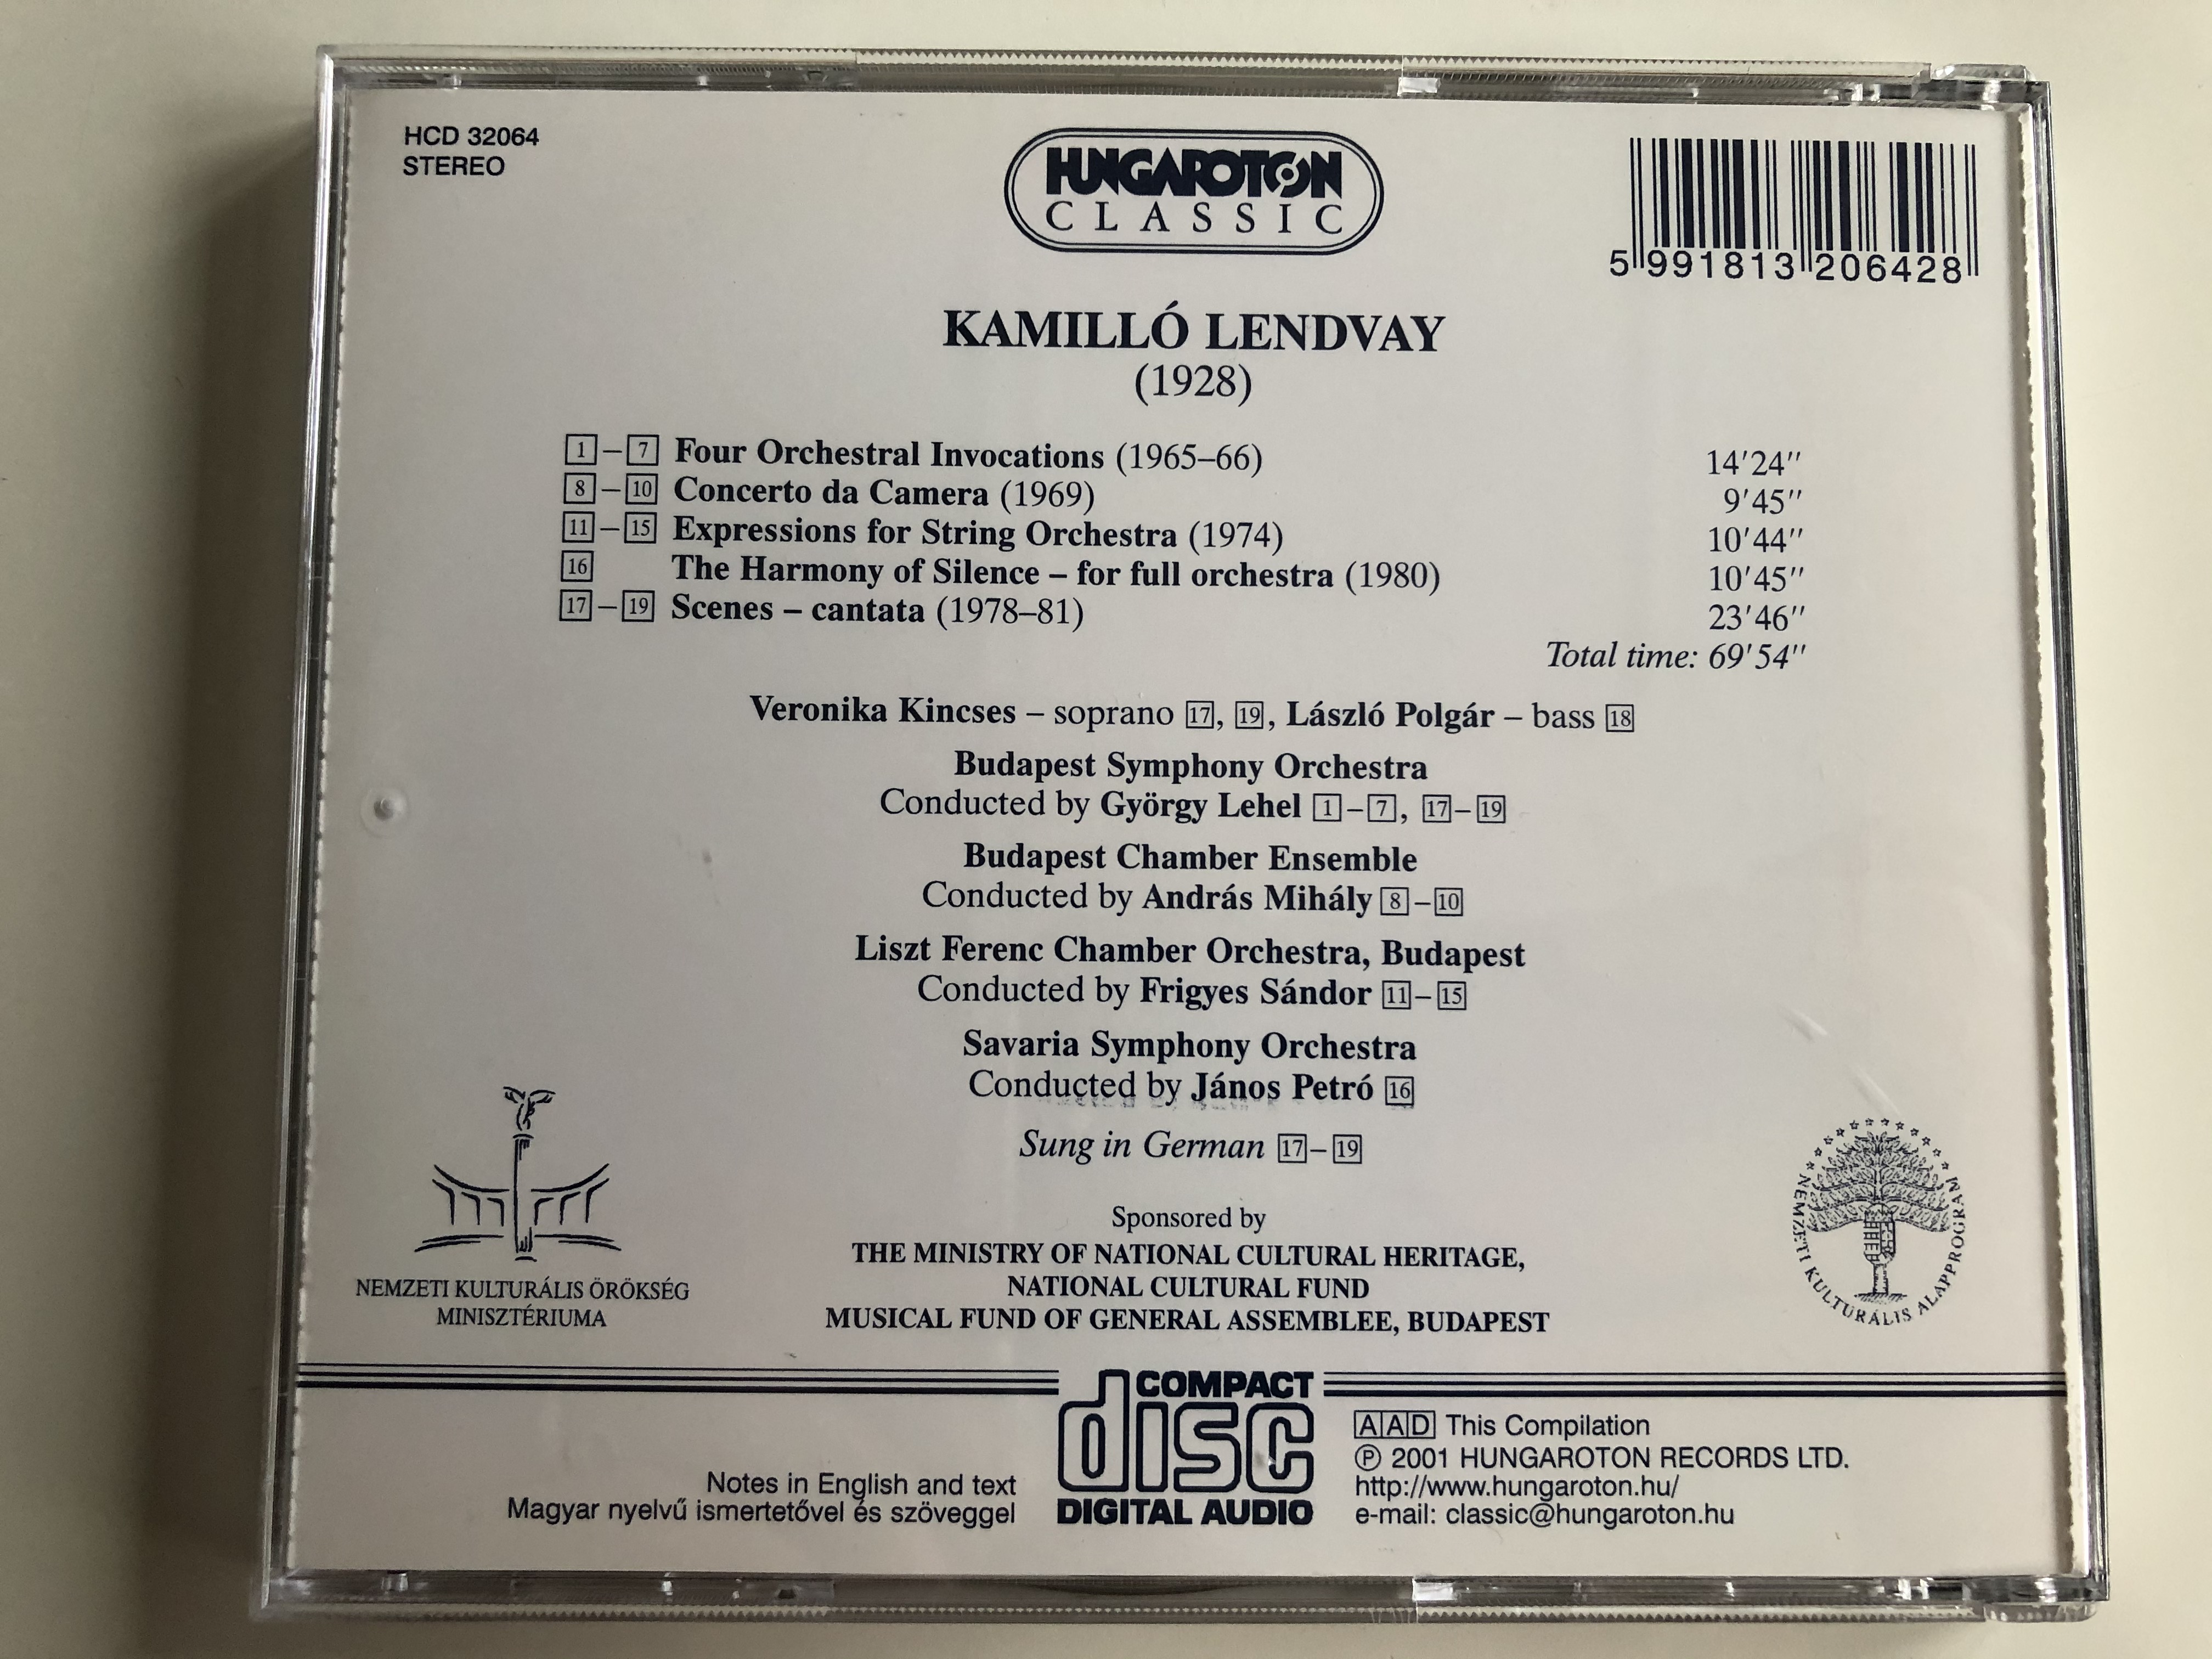 kamillo-lendvay-four-orchestral-invocations-concerto-da-camera-experssions-for-string-orchestra-the-harmony-of-silnce-scenes-cantata-hungaroton-classic-audio-cd-2001-stereo-hcd-32064-11-.jpg